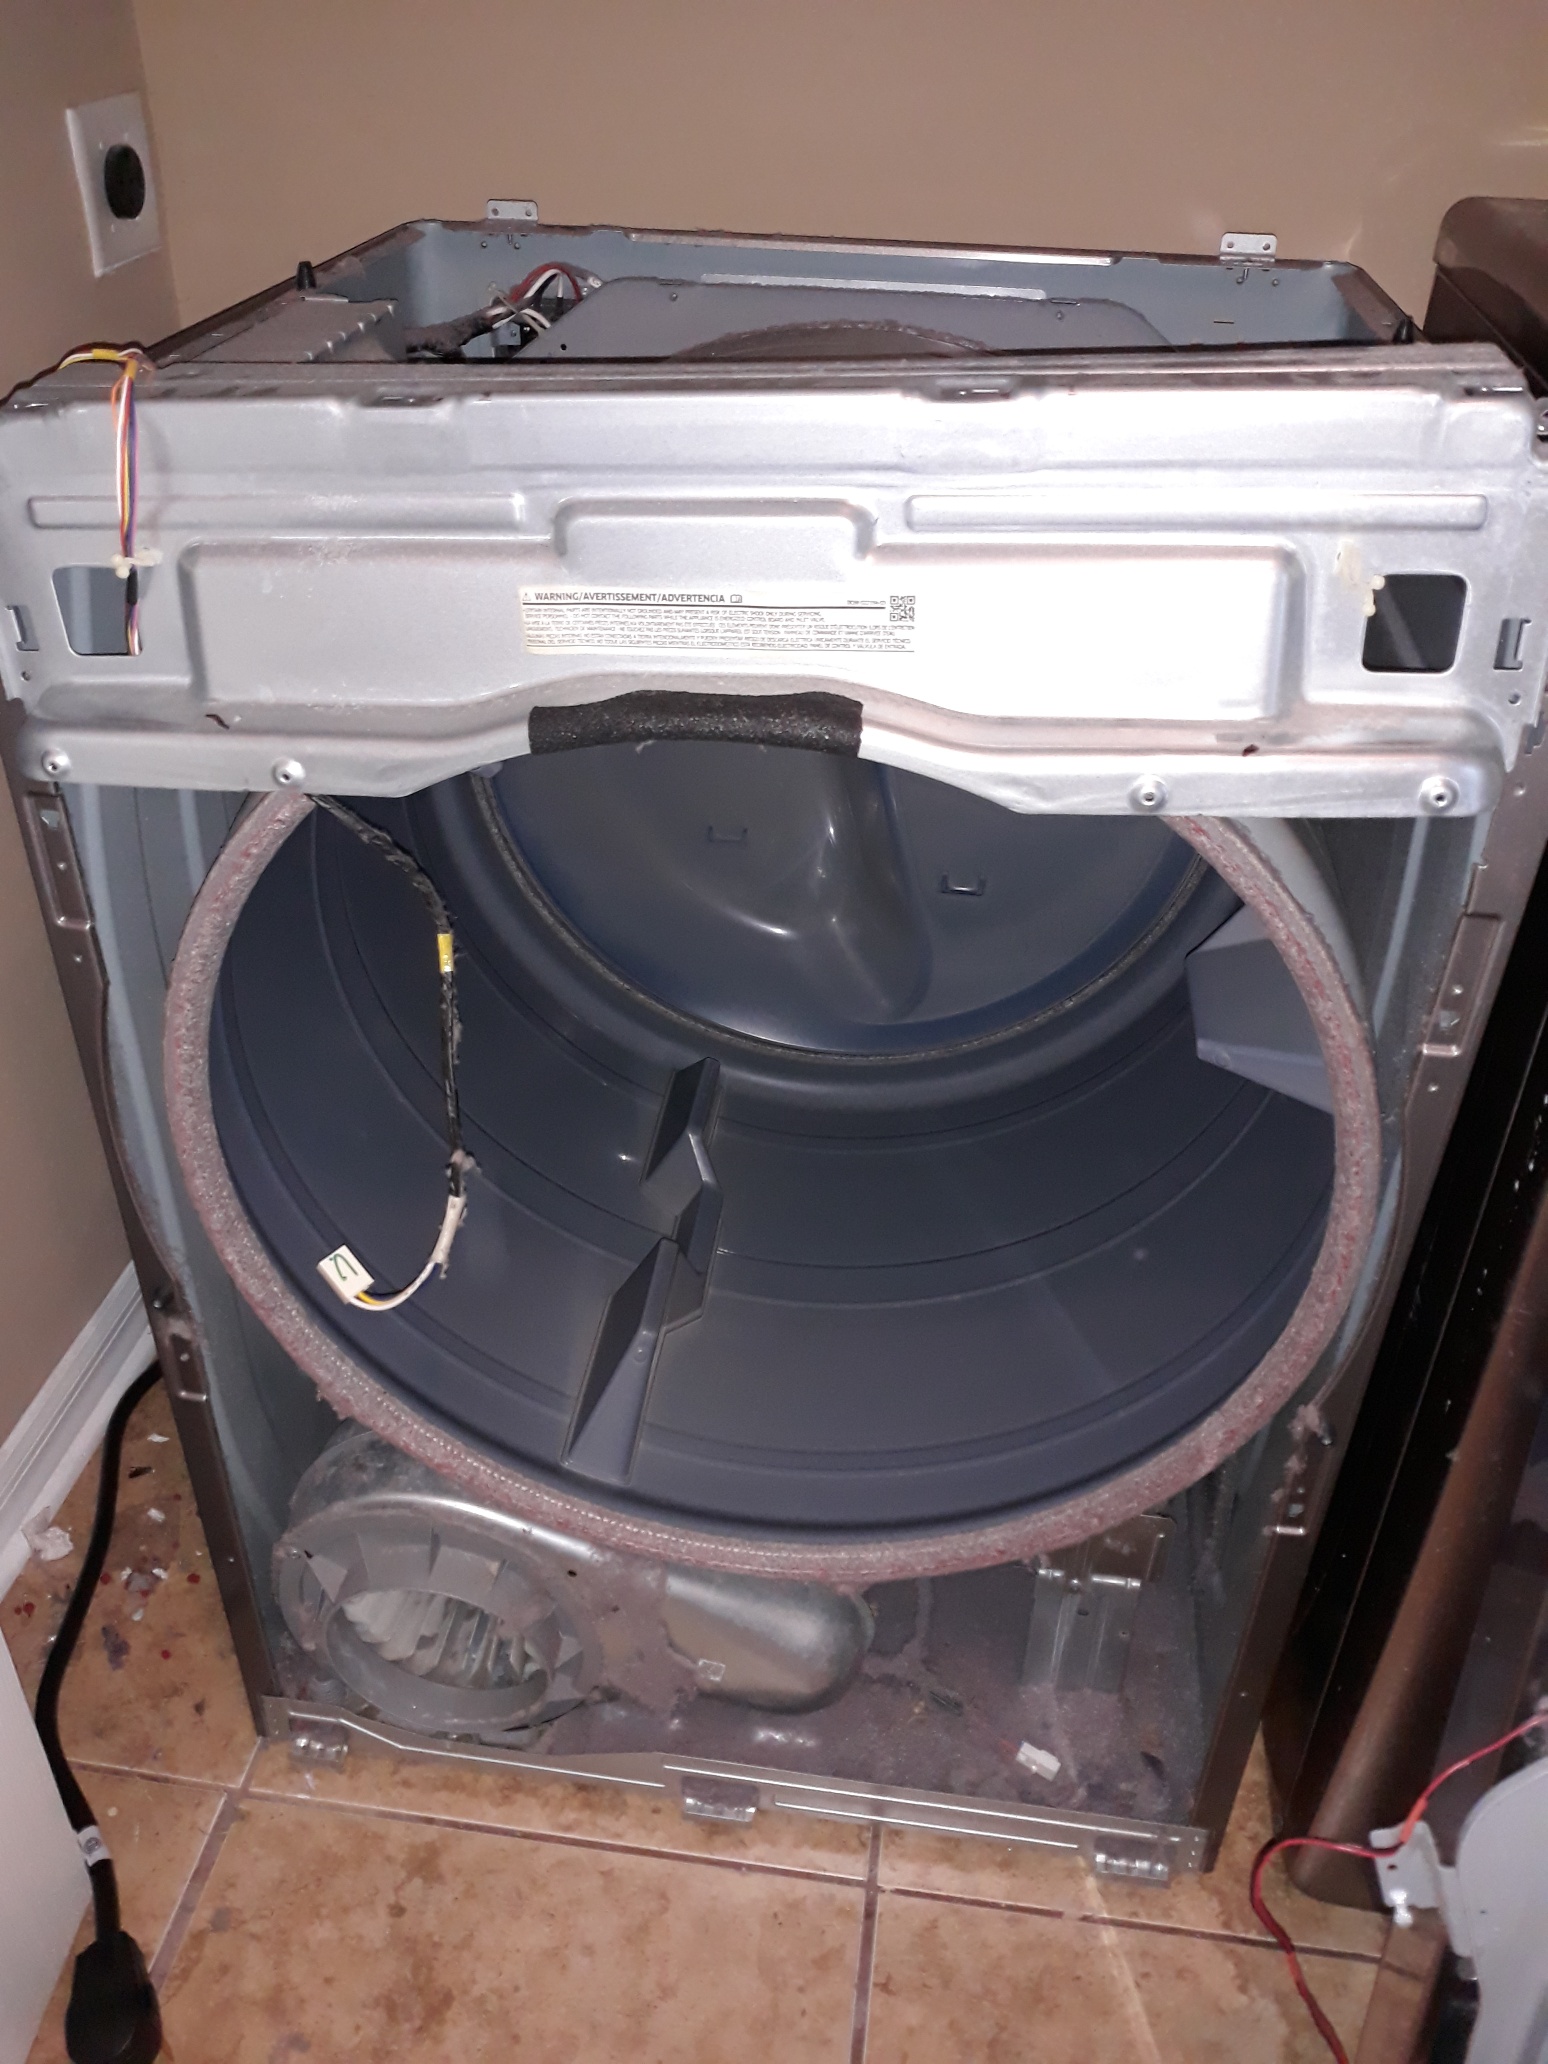 appliance repair dryer repair repaired by replacement of the failed heating element and internal cleaning of the excessive lint buildup spurling drive coleman fl 33521